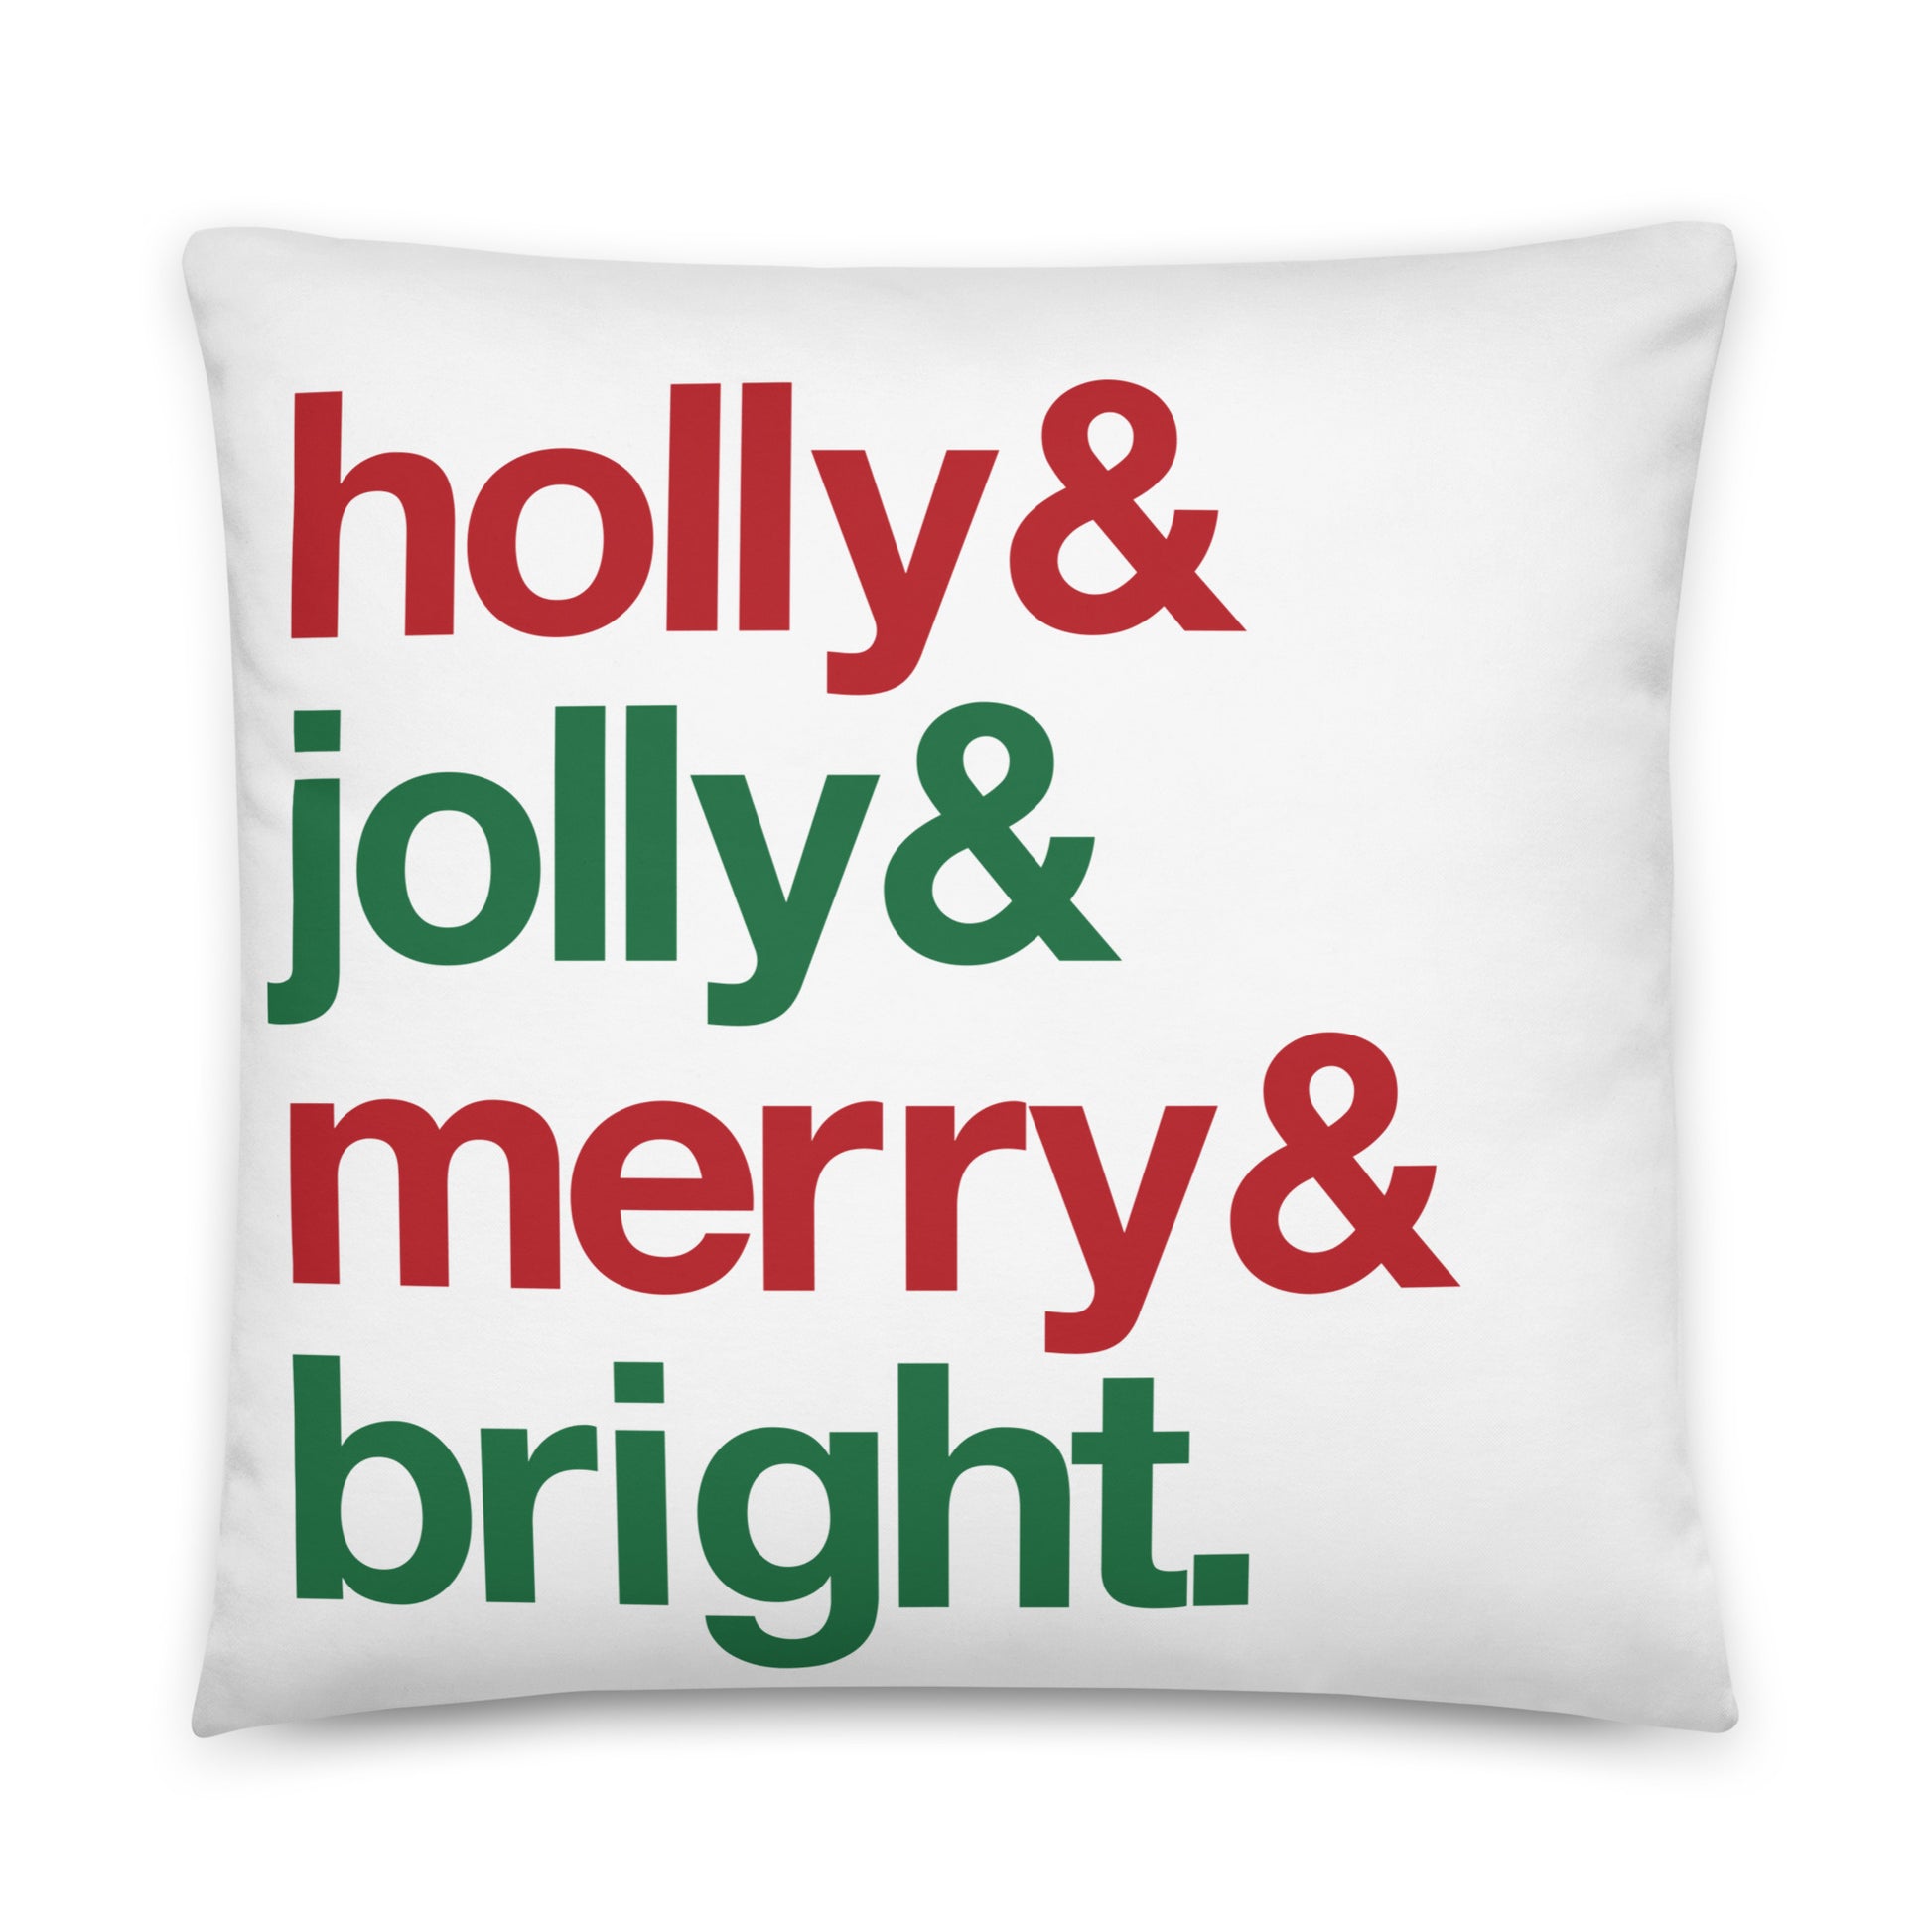 A 22" by 22" throw pillow decorated with four lines of red and green text that read "Holly & jolly & merry & bright".